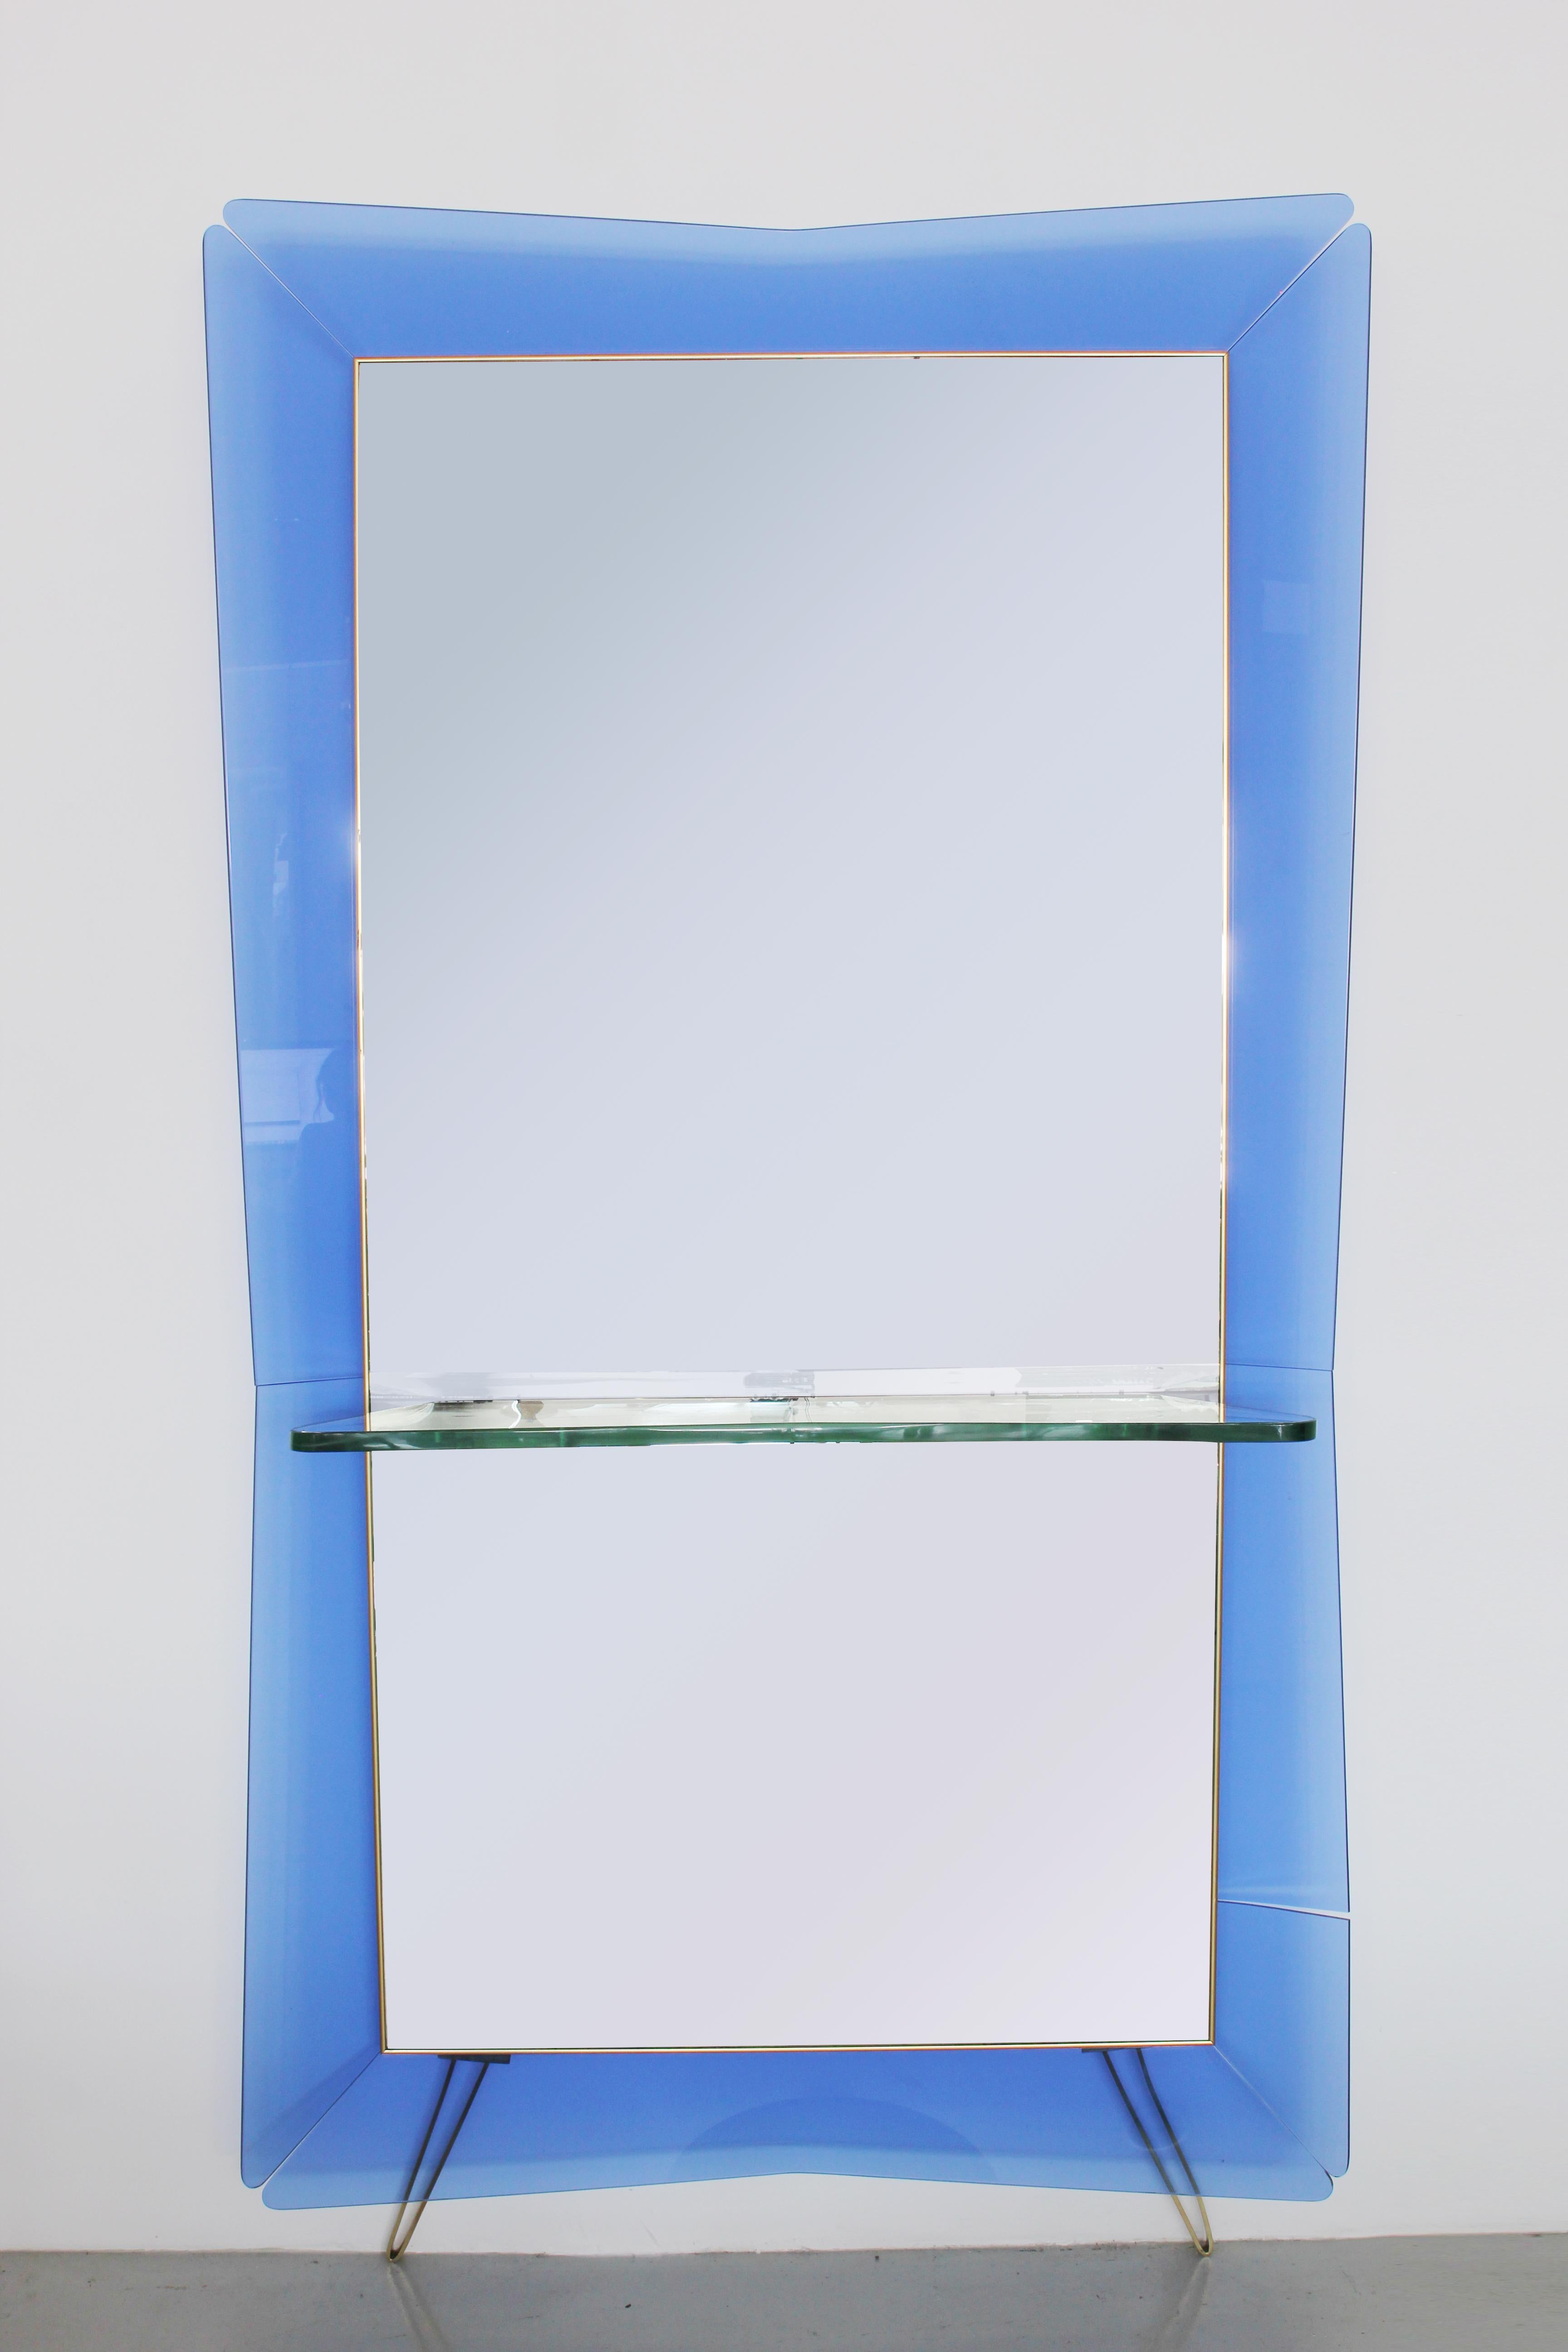 Giant Cristal Art mirror with blue frame and glass console.